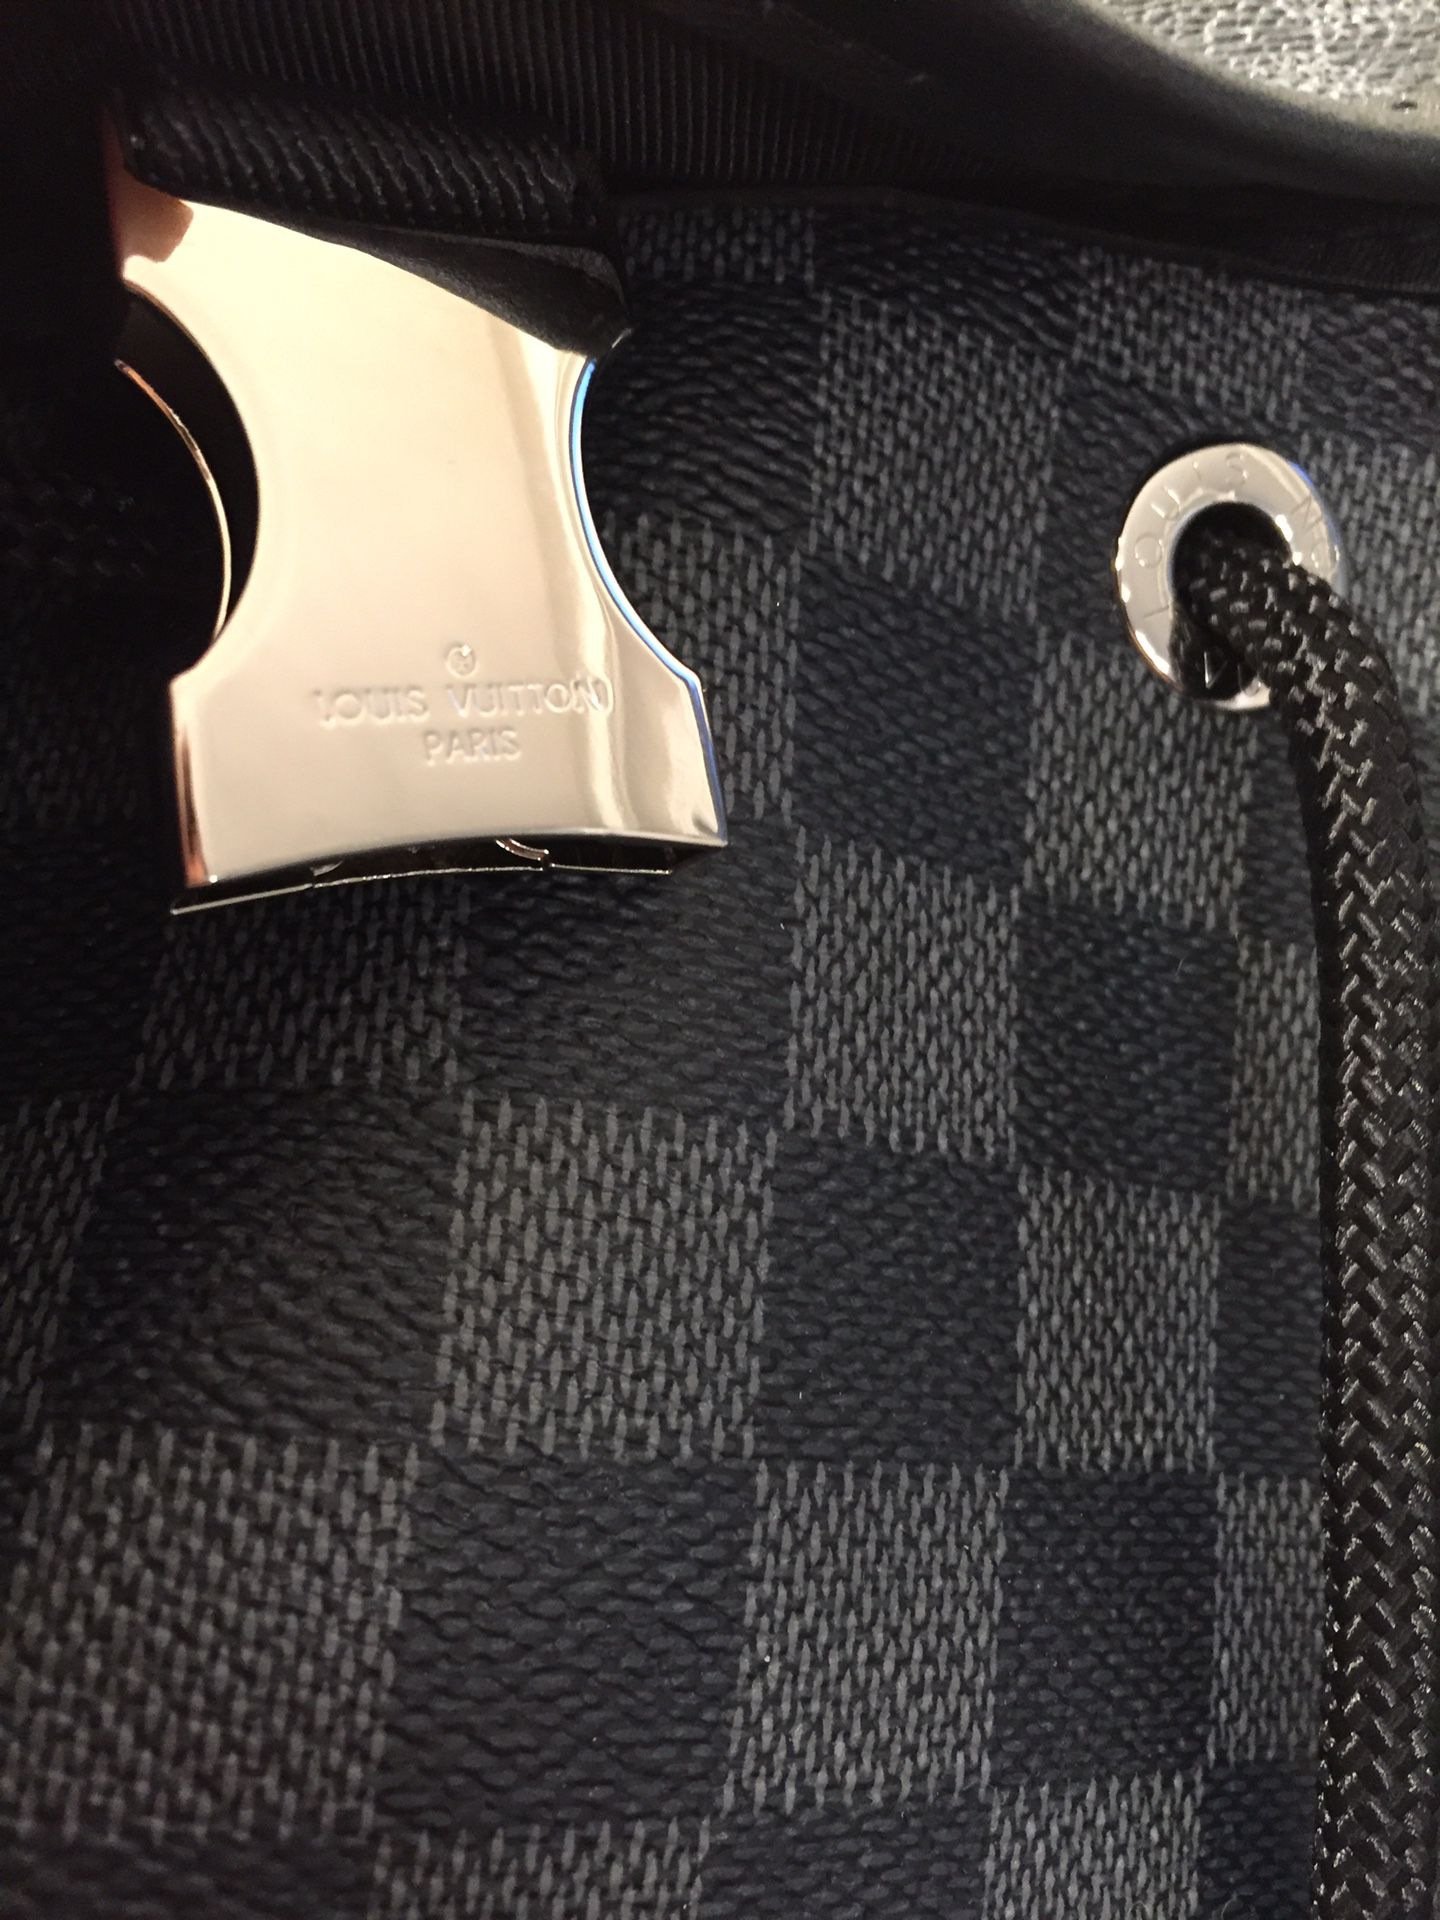 Louis Vuitton Zack Backpack for Sale in Highland Charter Township